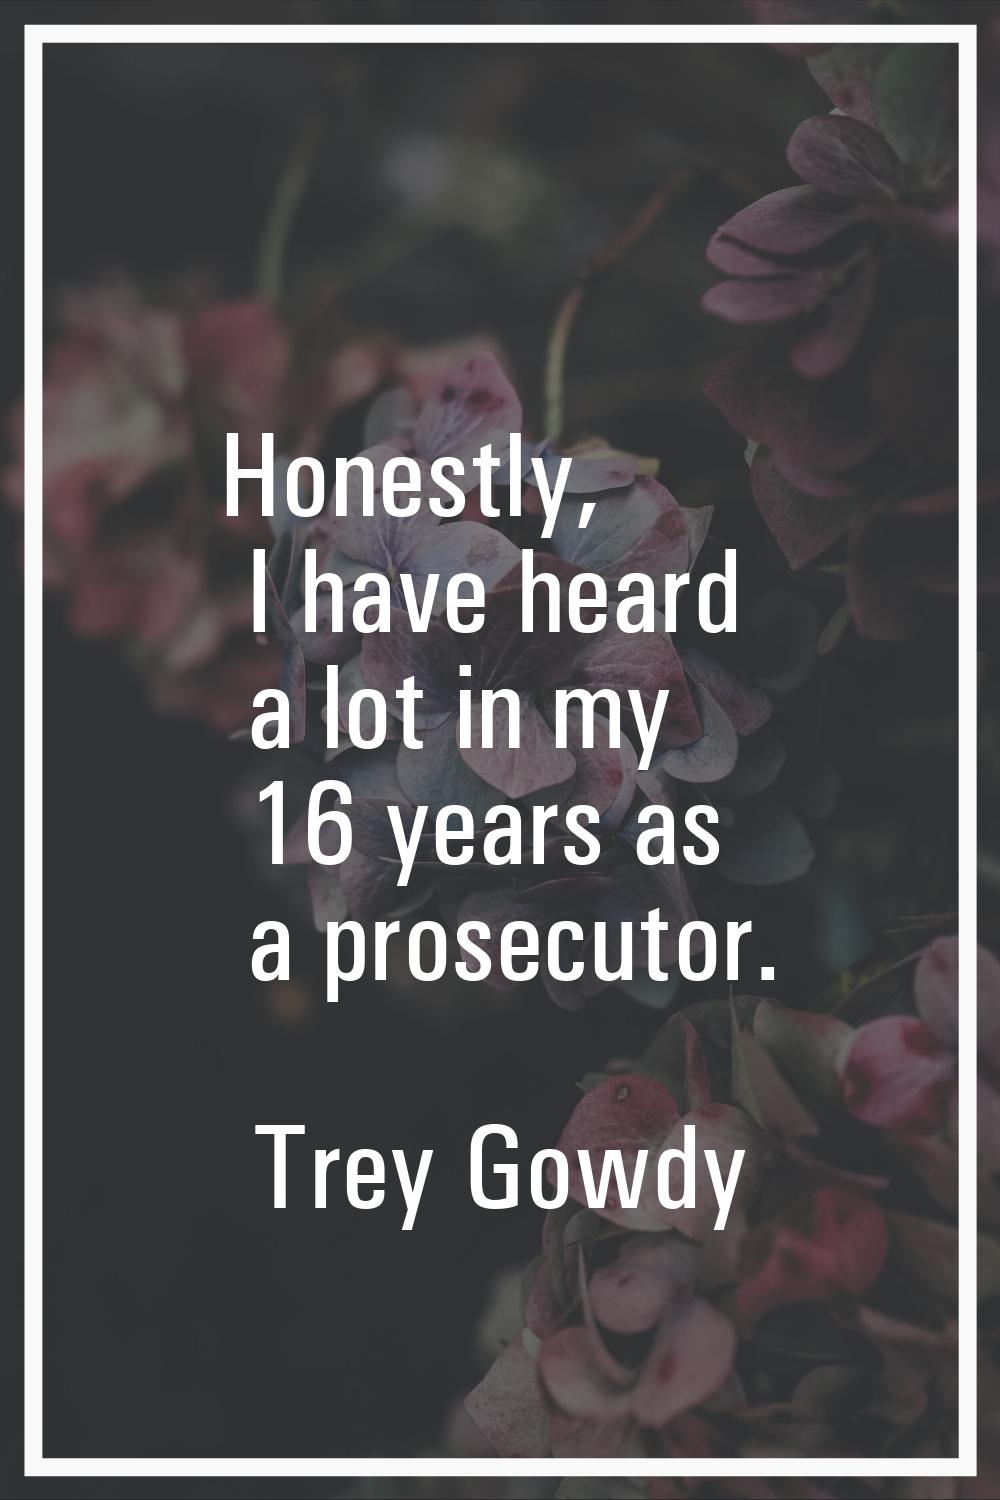 Honestly, I have heard a lot in my 16 years as a prosecutor.